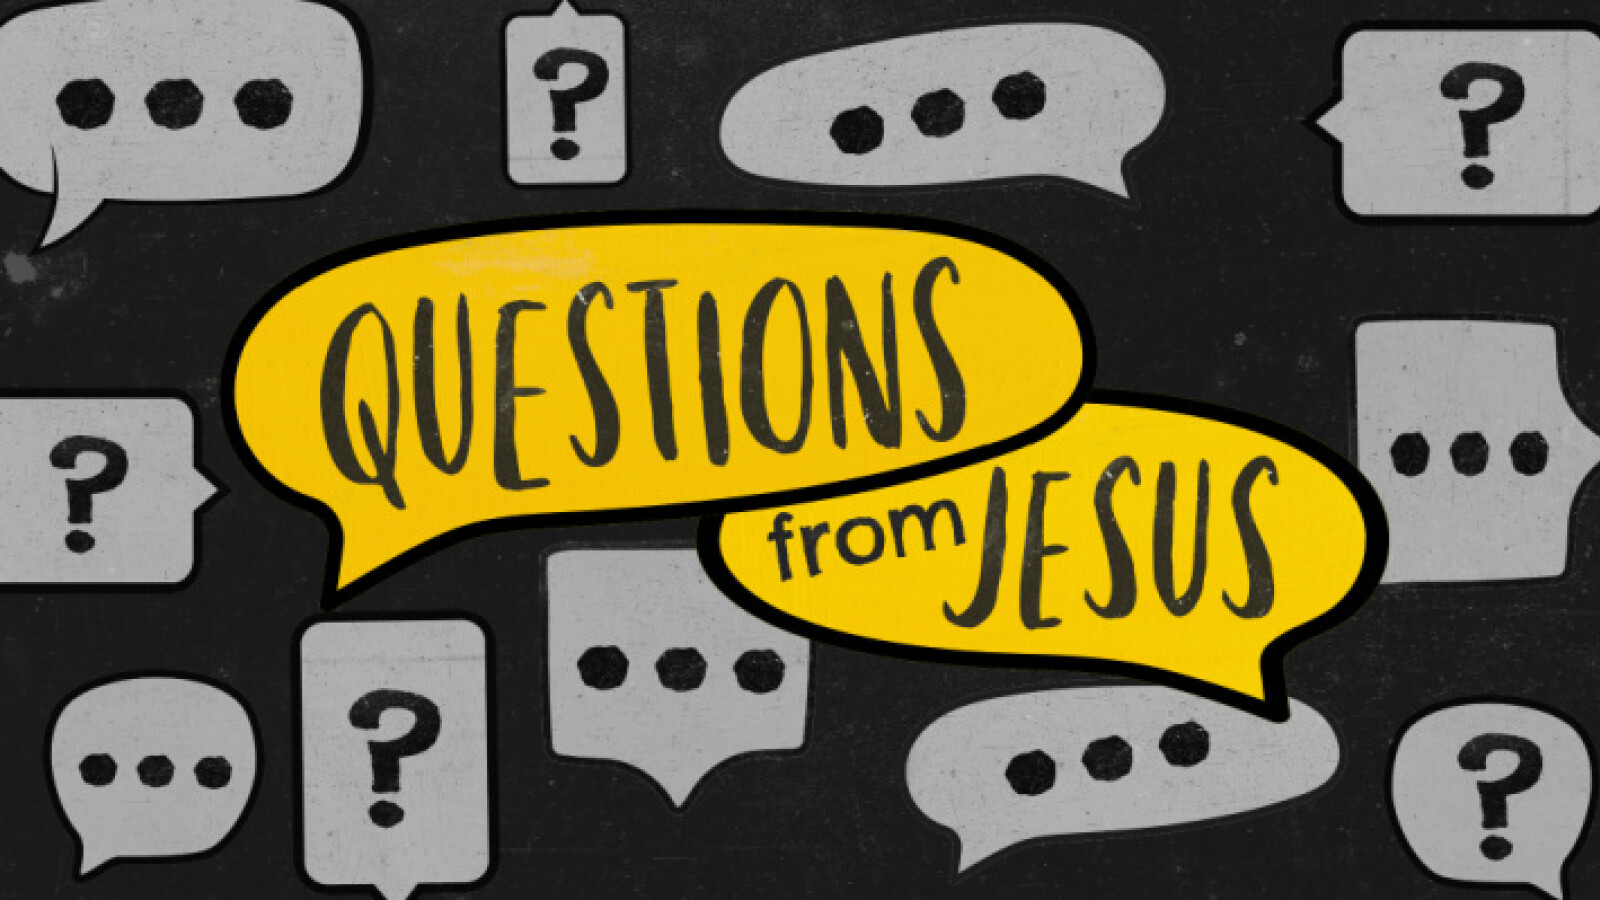 Questions from Jesus